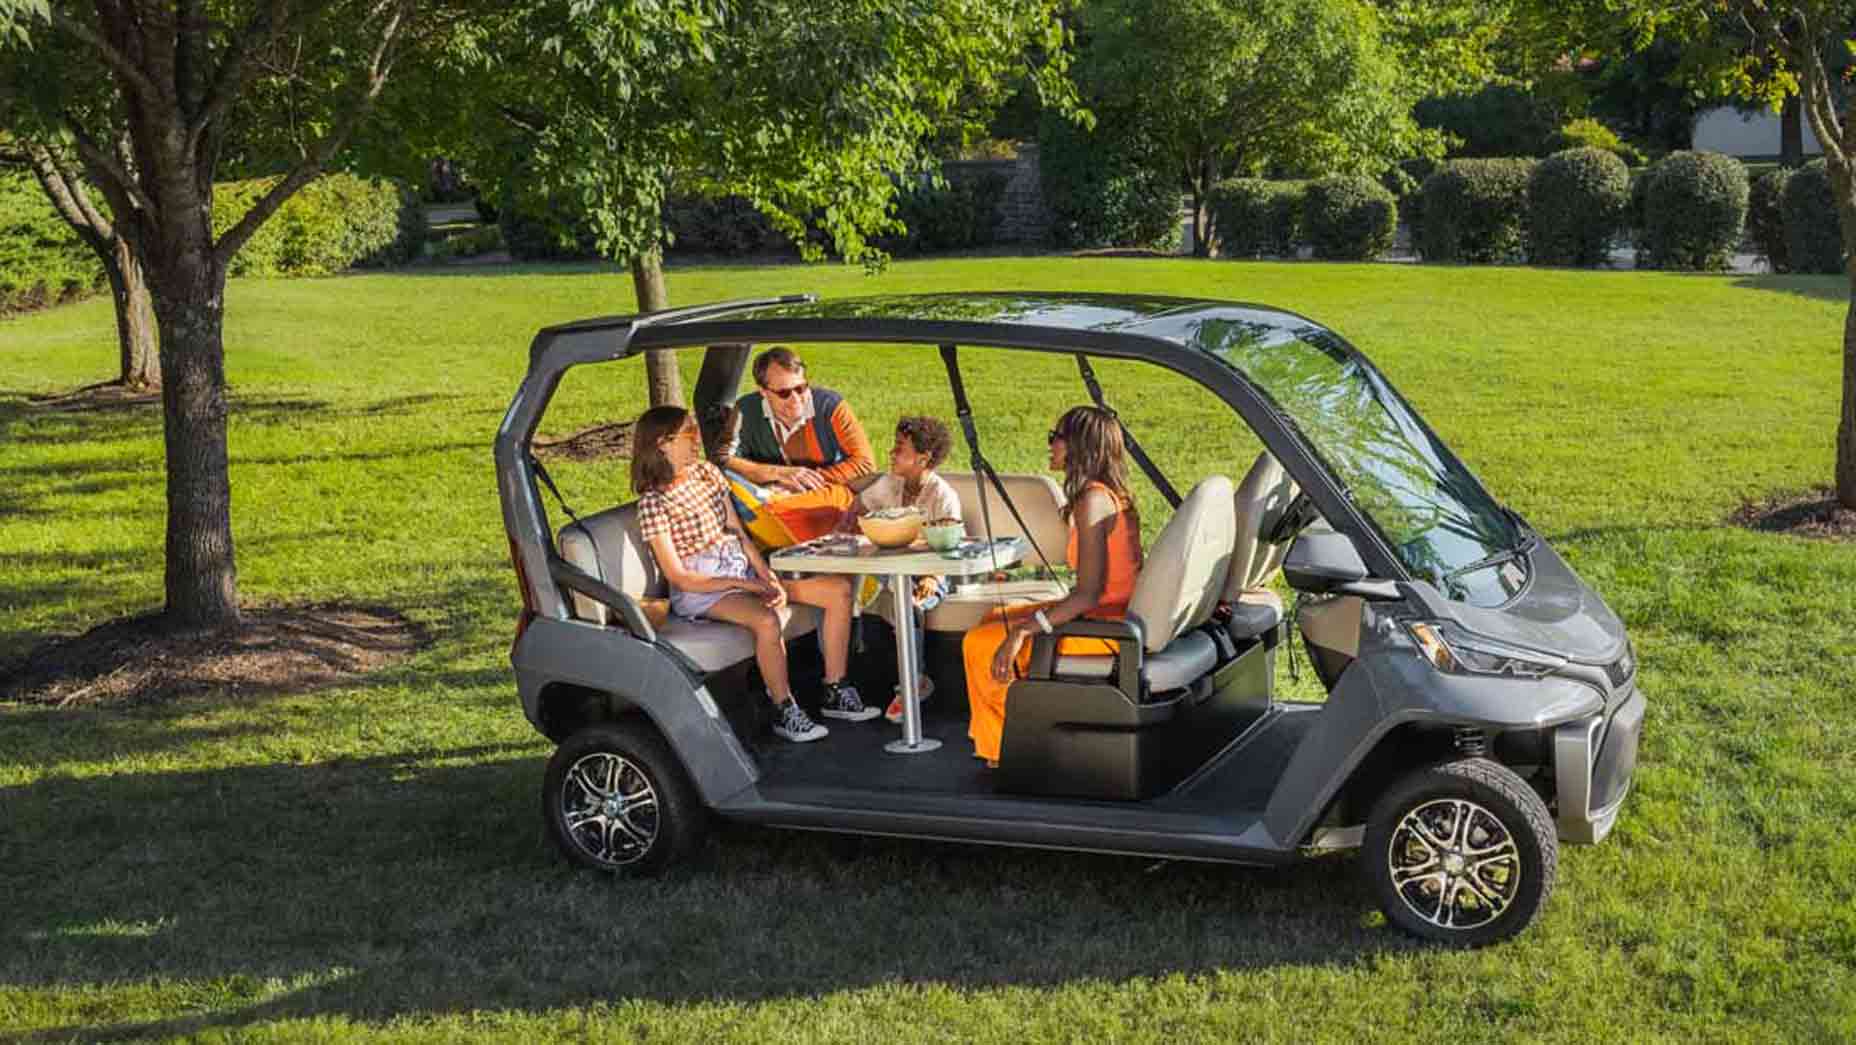 This $30,000 golf cart is better suited for partying than playing golf